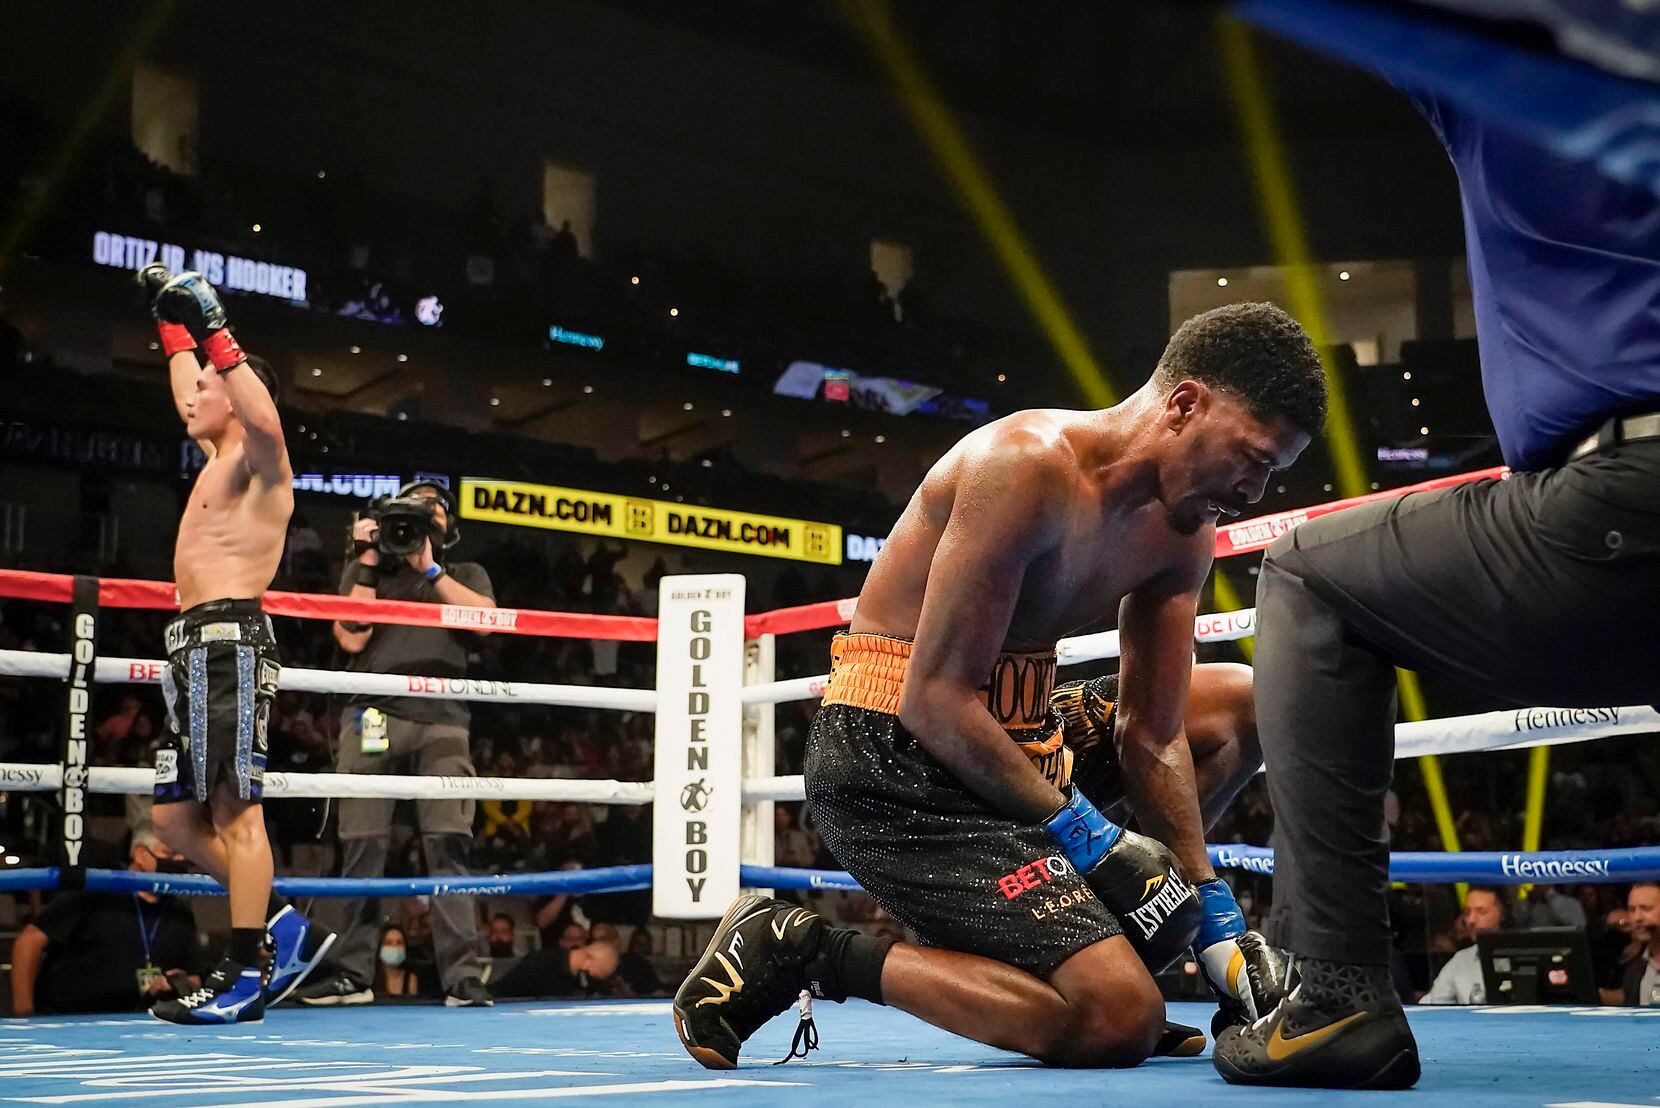 Vergil Ortiz Jr. (left) celebrates his victory over Maurice Hooker (right) for the vacant WBO international welterweight title as the referee calls the fight at Dickies Arena on Saturday, March 20, 2021, in Fort Worth.